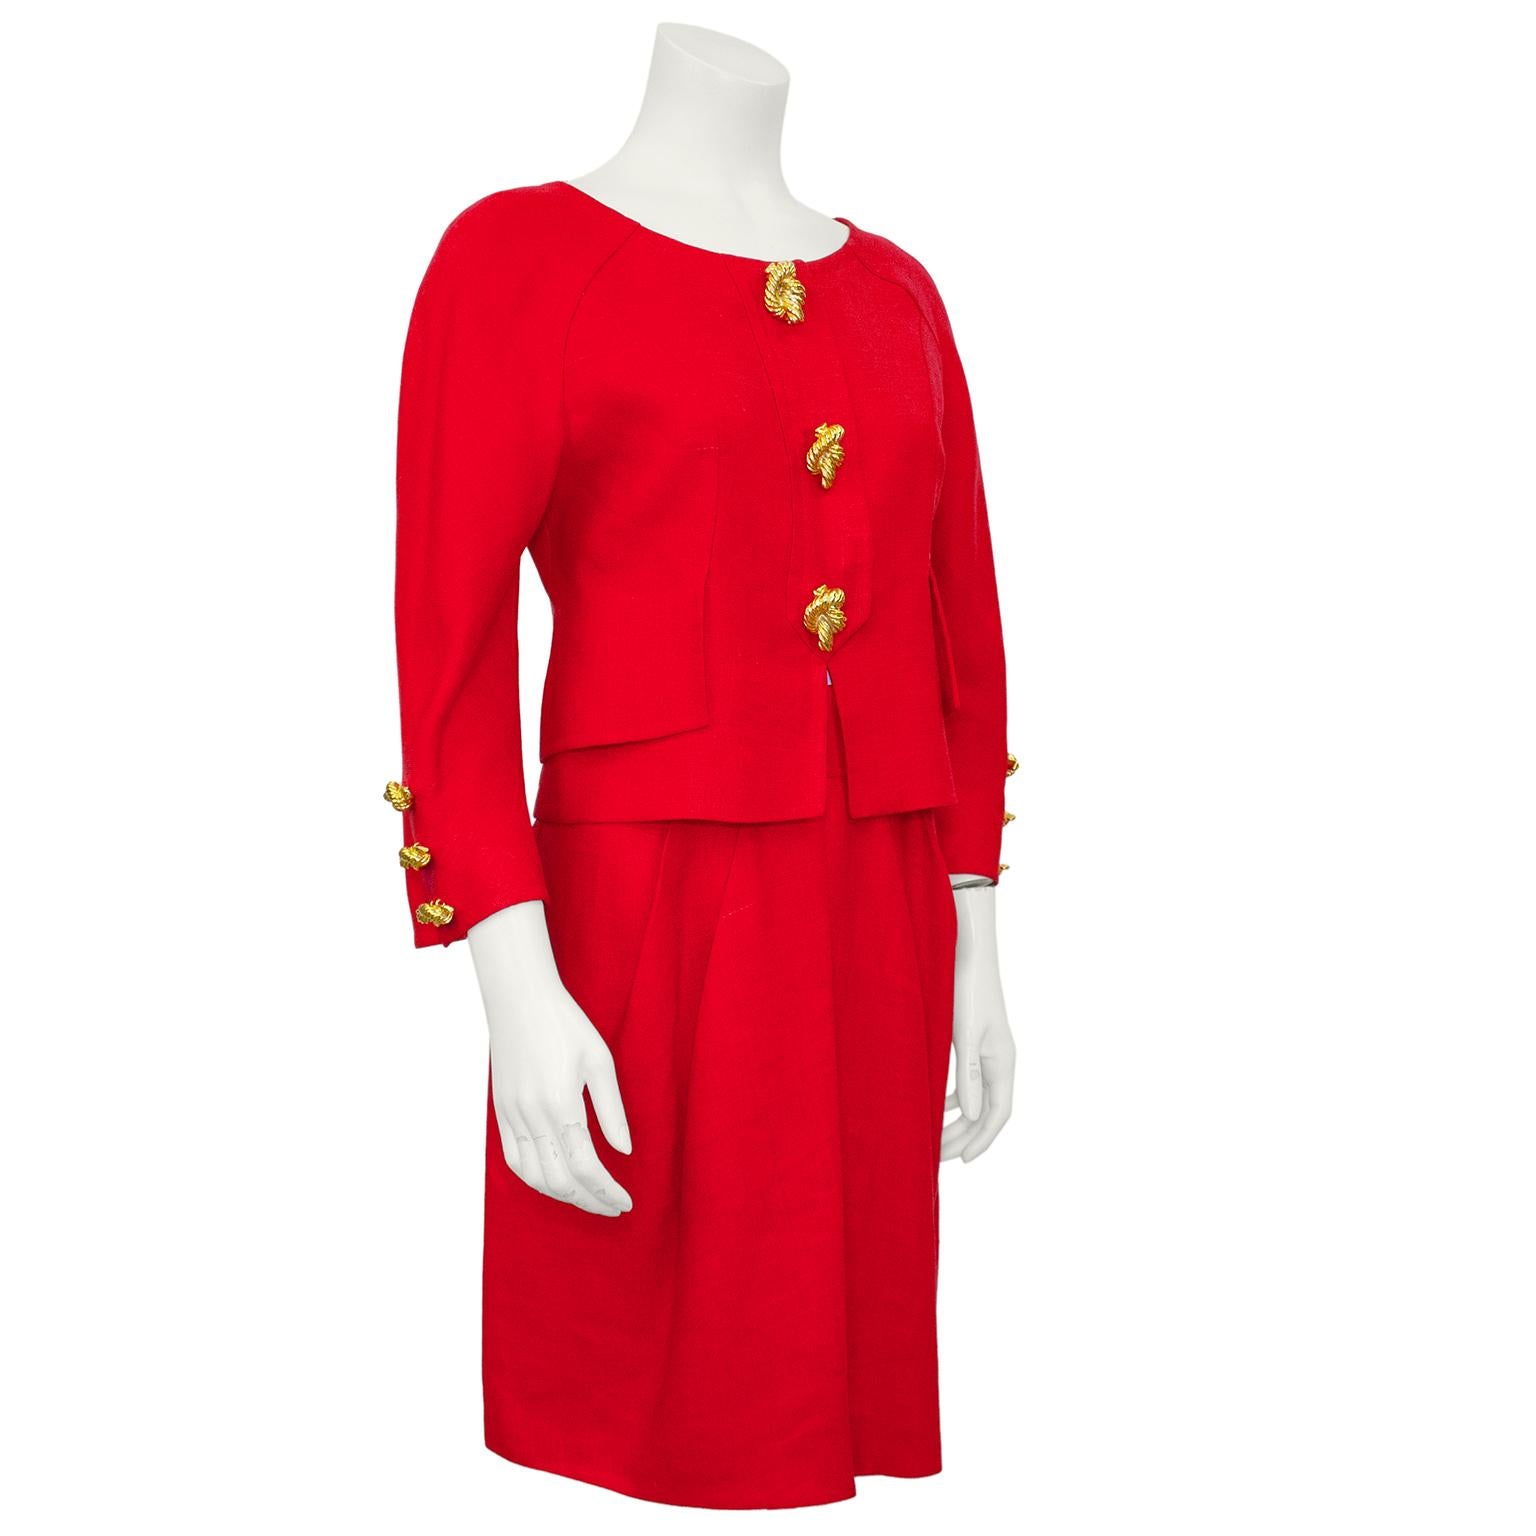 Vibrant raspberry red linen Christian Lacroix skirt suit form the 1990s. Collarless boat neck jacket with beautiful seam work and oversized pocket flaps. Embellished with some of the most fabulous buttons that we have every seen! Very heavy gold